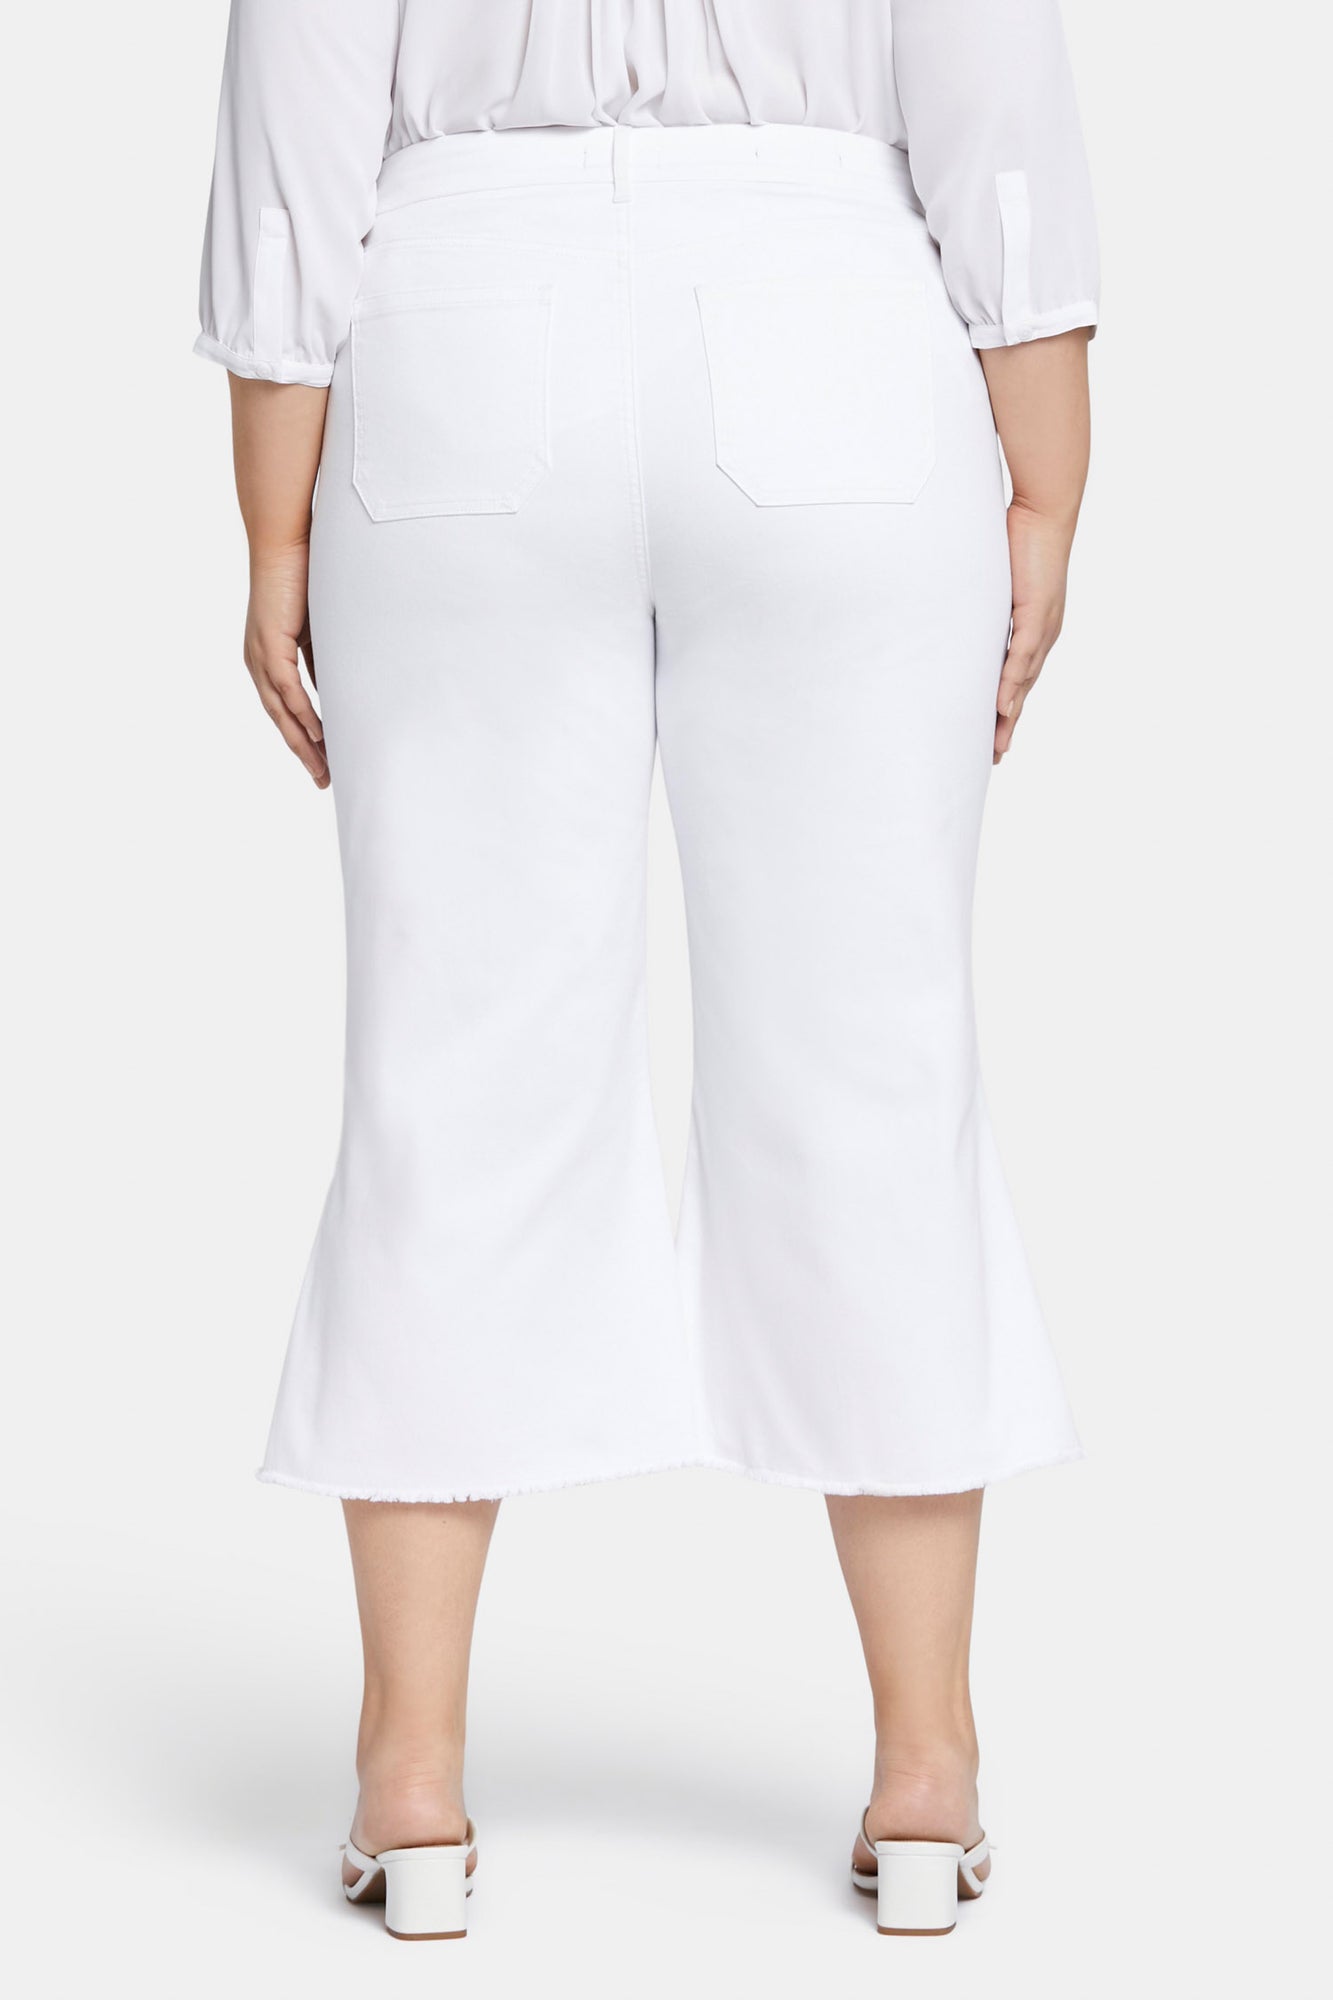 NYDJ Patchie Wide Leg Capri Jeans In Plus Size With Frayed Hems - Optic White